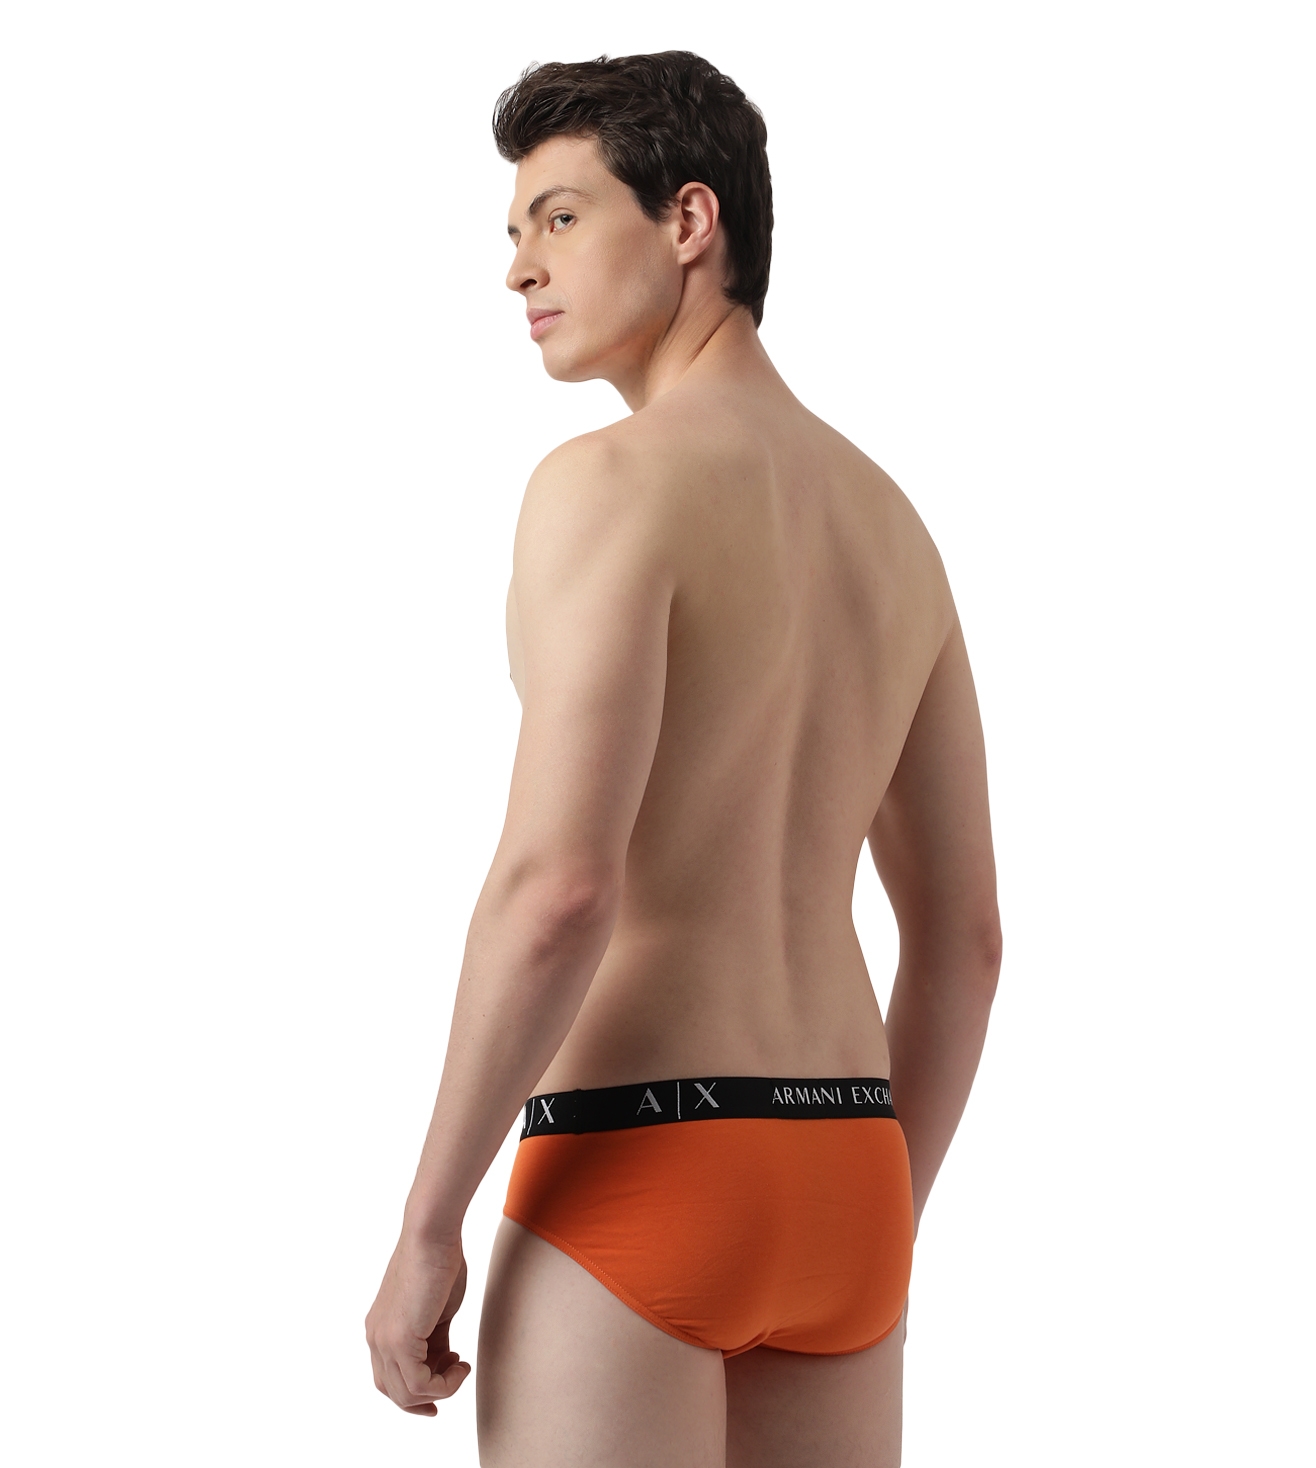 Buy Black Boxers for Men by ARMANI EXCHANGE Online